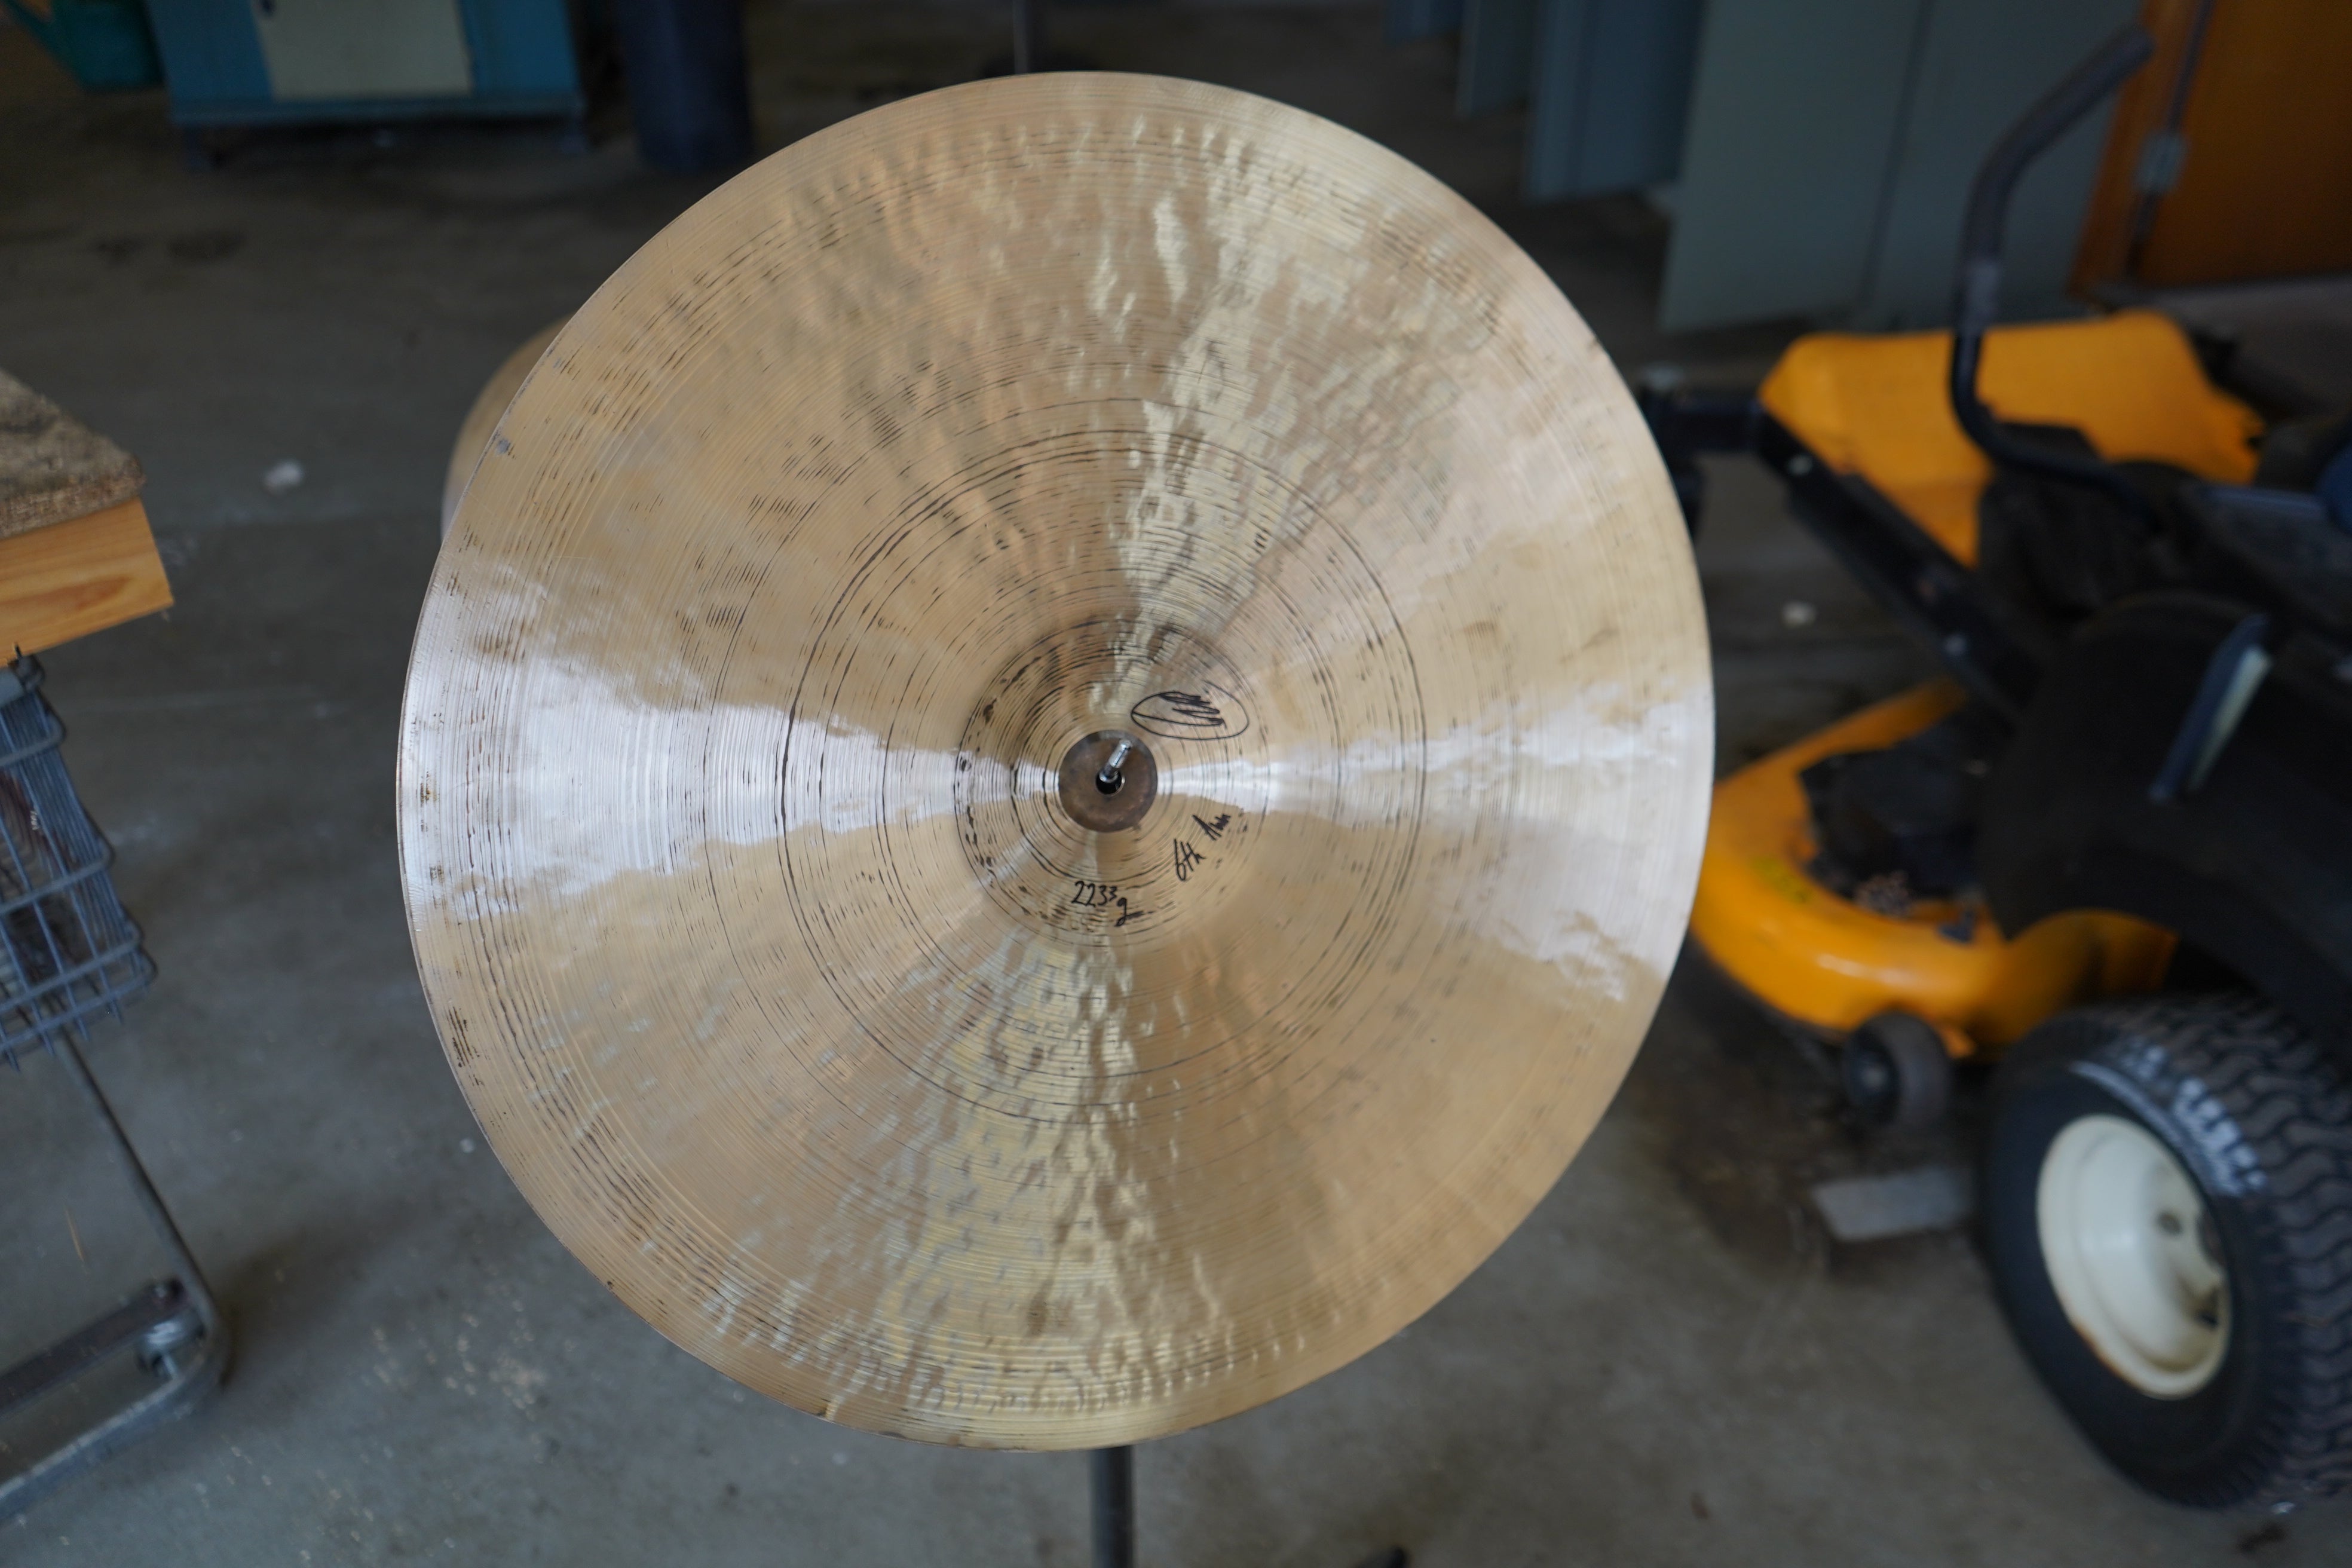 22" 6th Anniversary Ride 2233g (Hand Formed Bell)